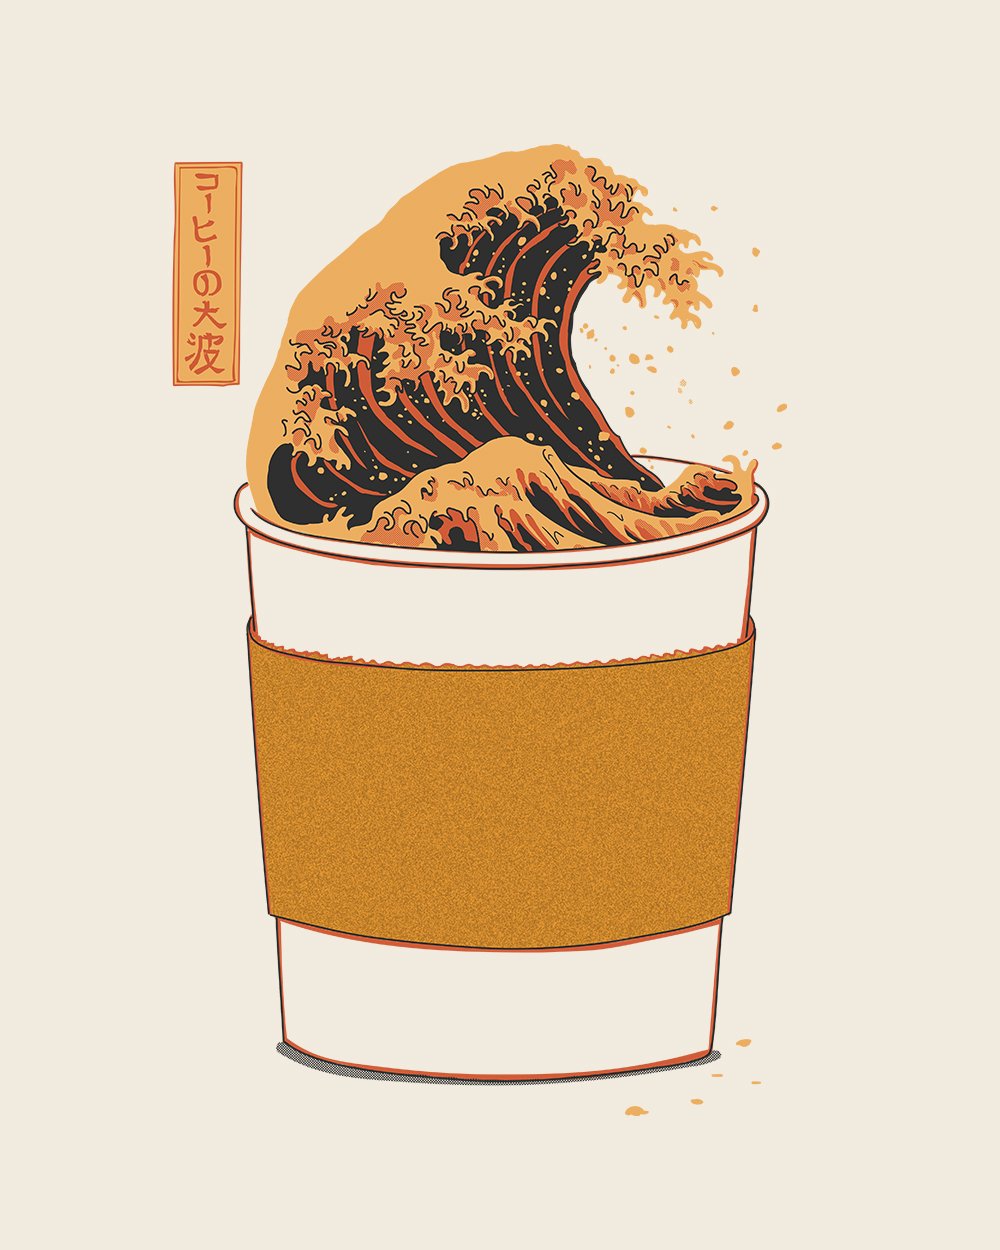 The Great Wave of Caffeine T-Shirt Europe Online #colour_natural